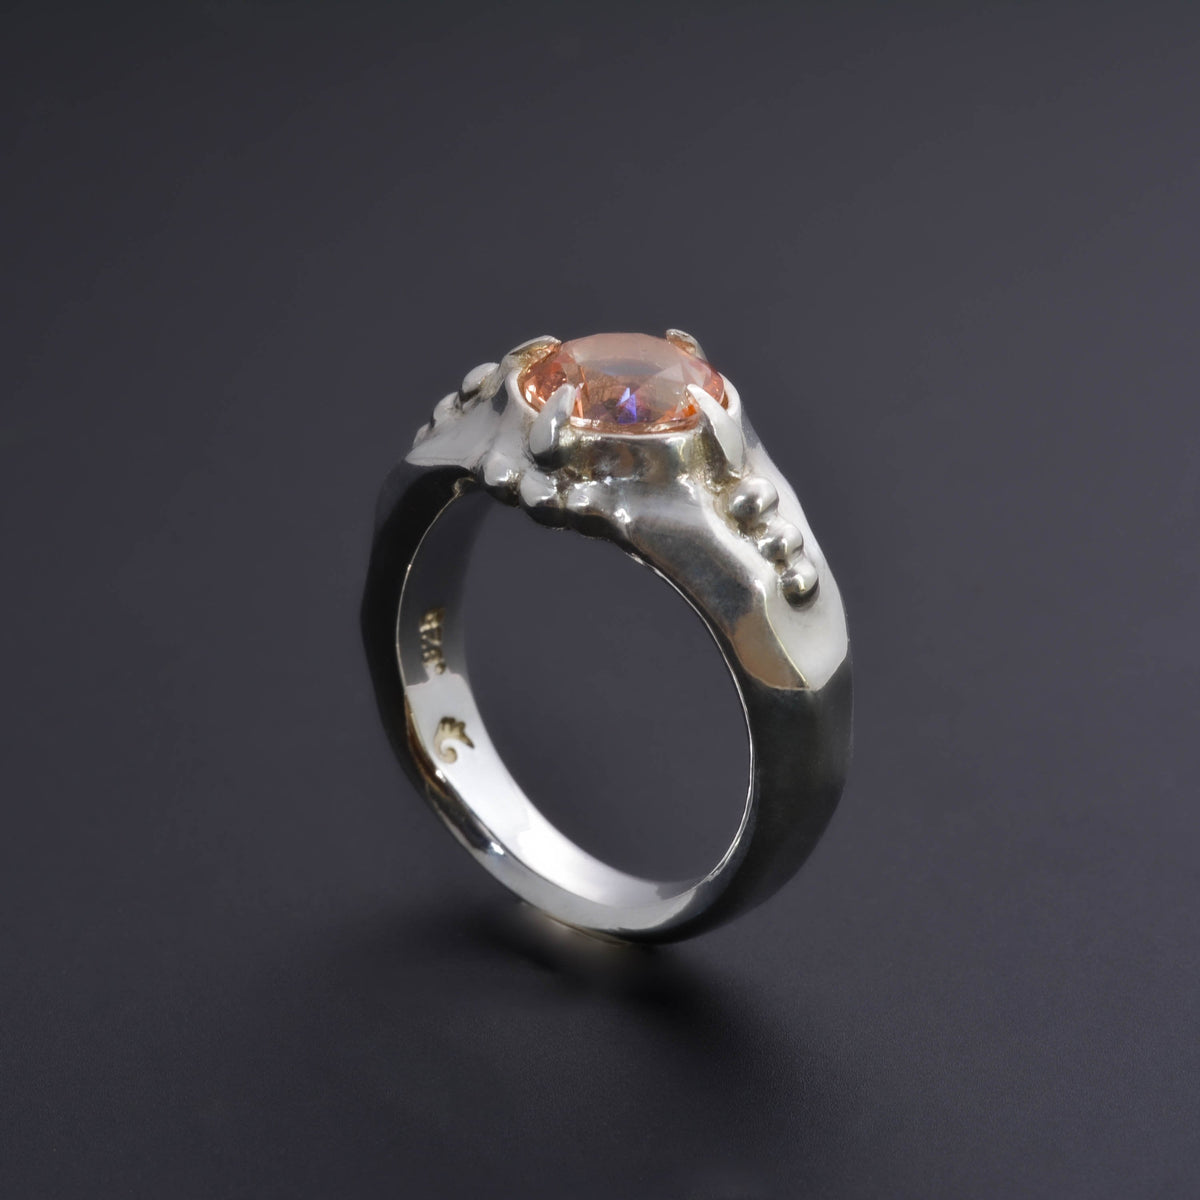 &quot;Organic Elegance: Handcrafted Silver Ring with Exquisite Carvings and Orange Topaz&quot;